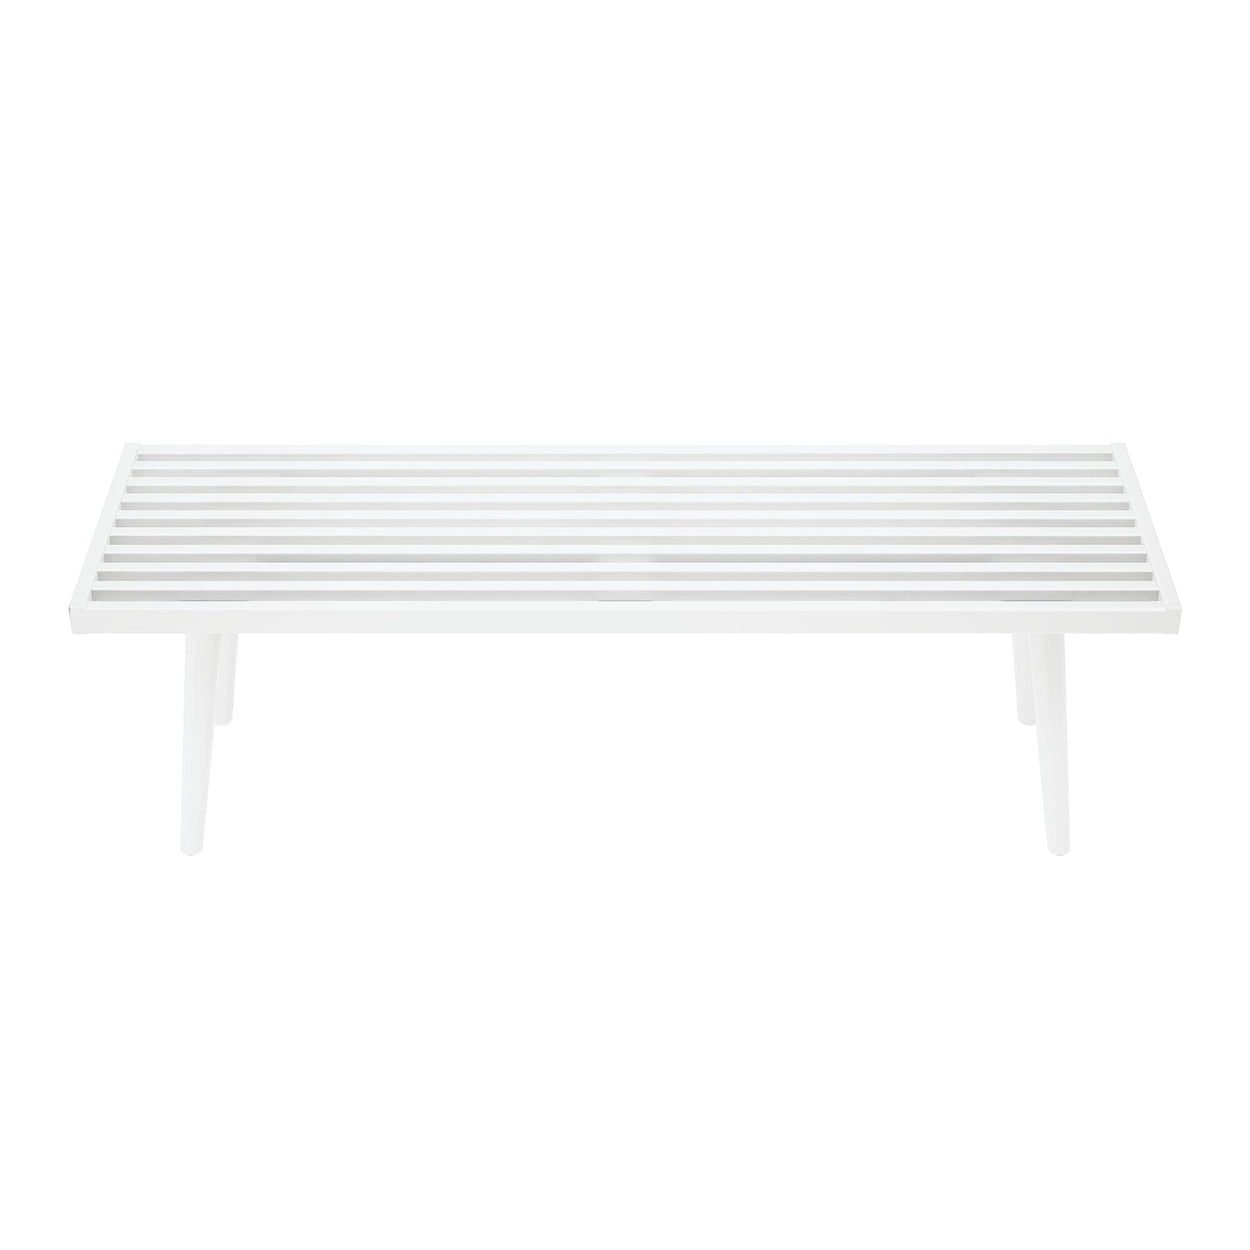 184302-002 : Accessories Mid-Century Modern Full-Size Bench, White